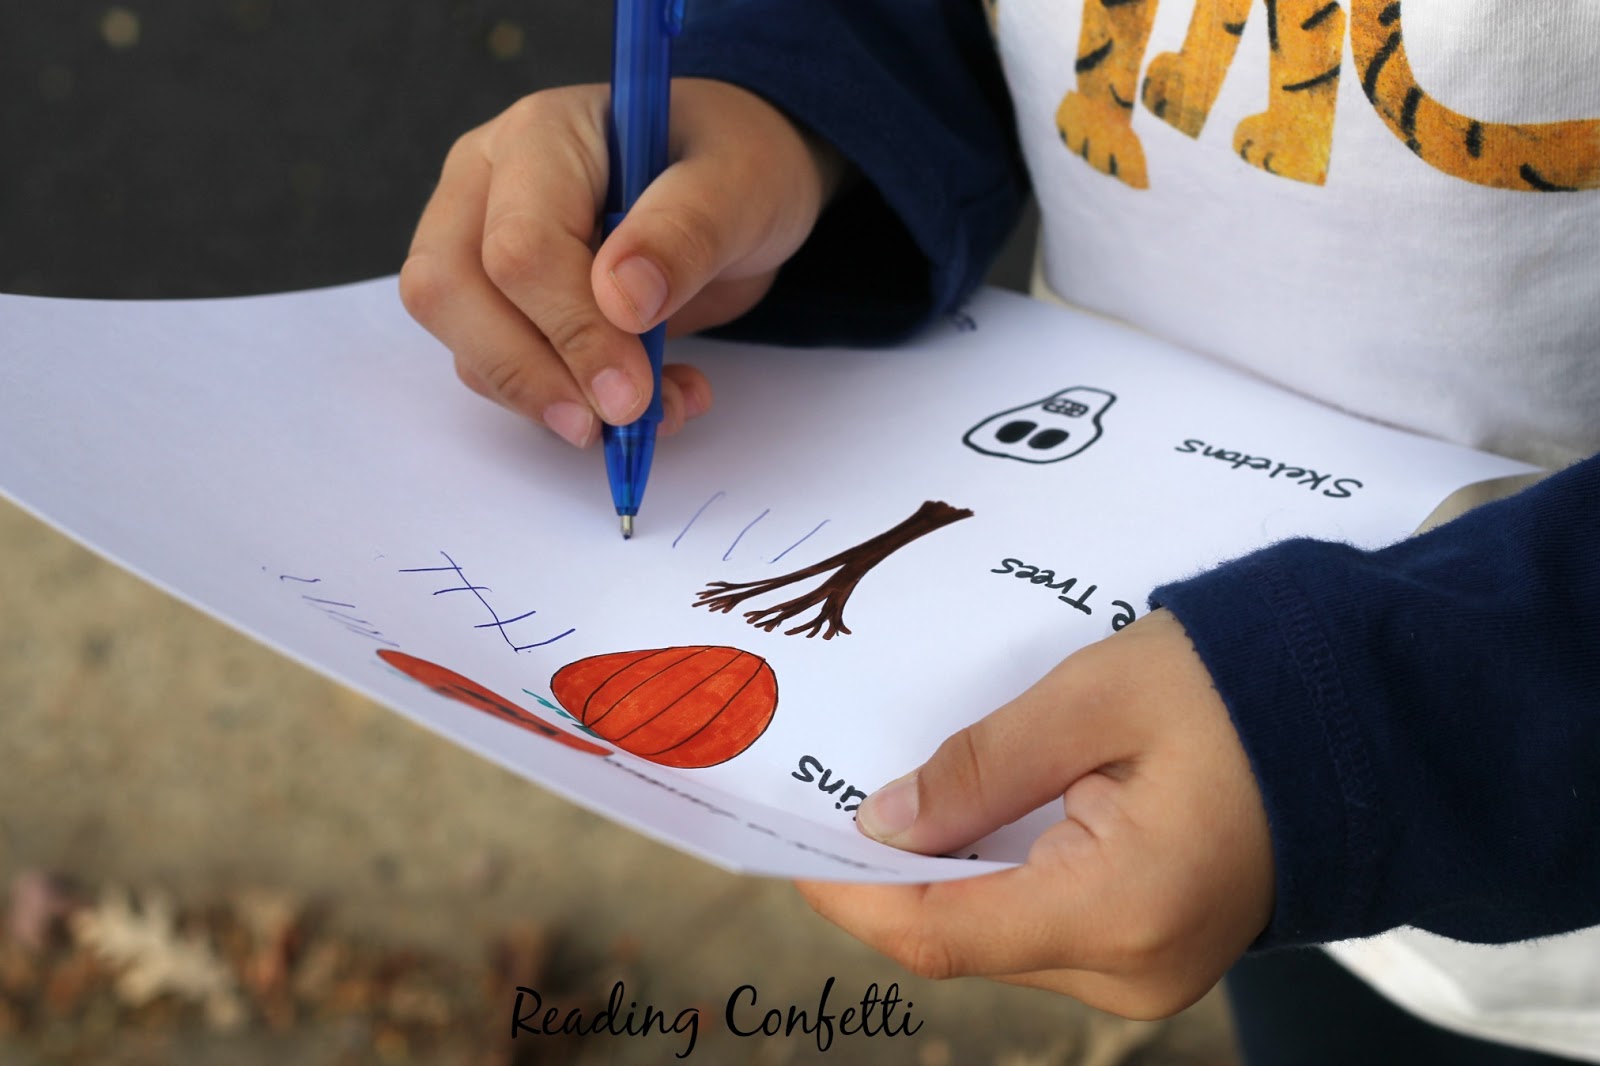 Make a simple tally mark scavenger hunt for your neighborhood this Halloween.